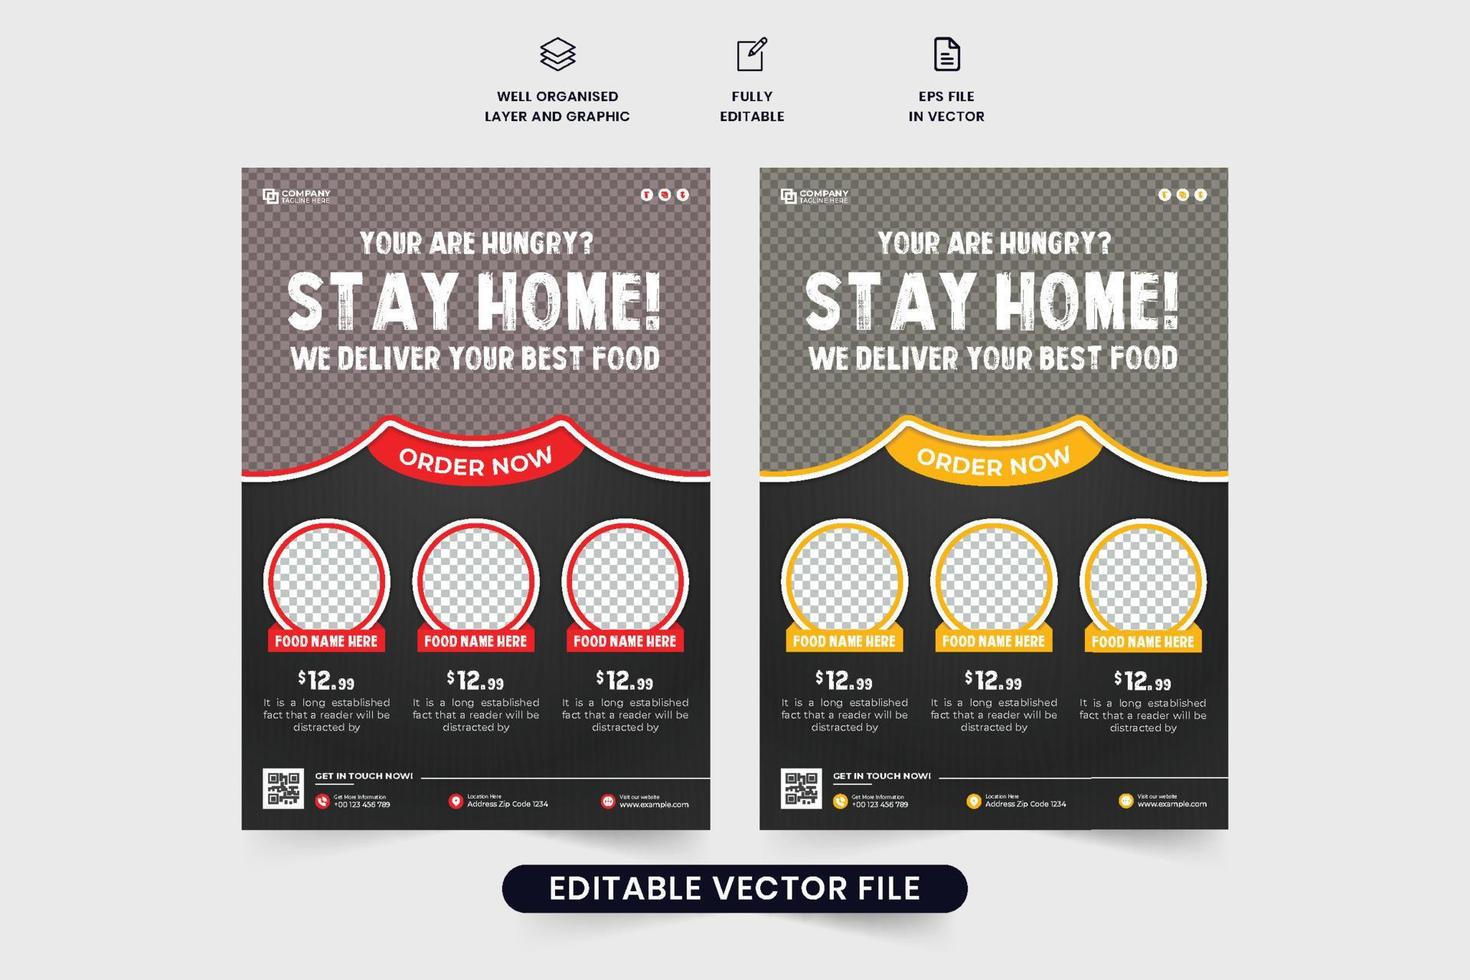 Creative restaurant flyer template vector with red and yellow colors. Restaurant food promotion menu template design on dark backgrounds. Food menu poster and flyer vector with photo placeholders.